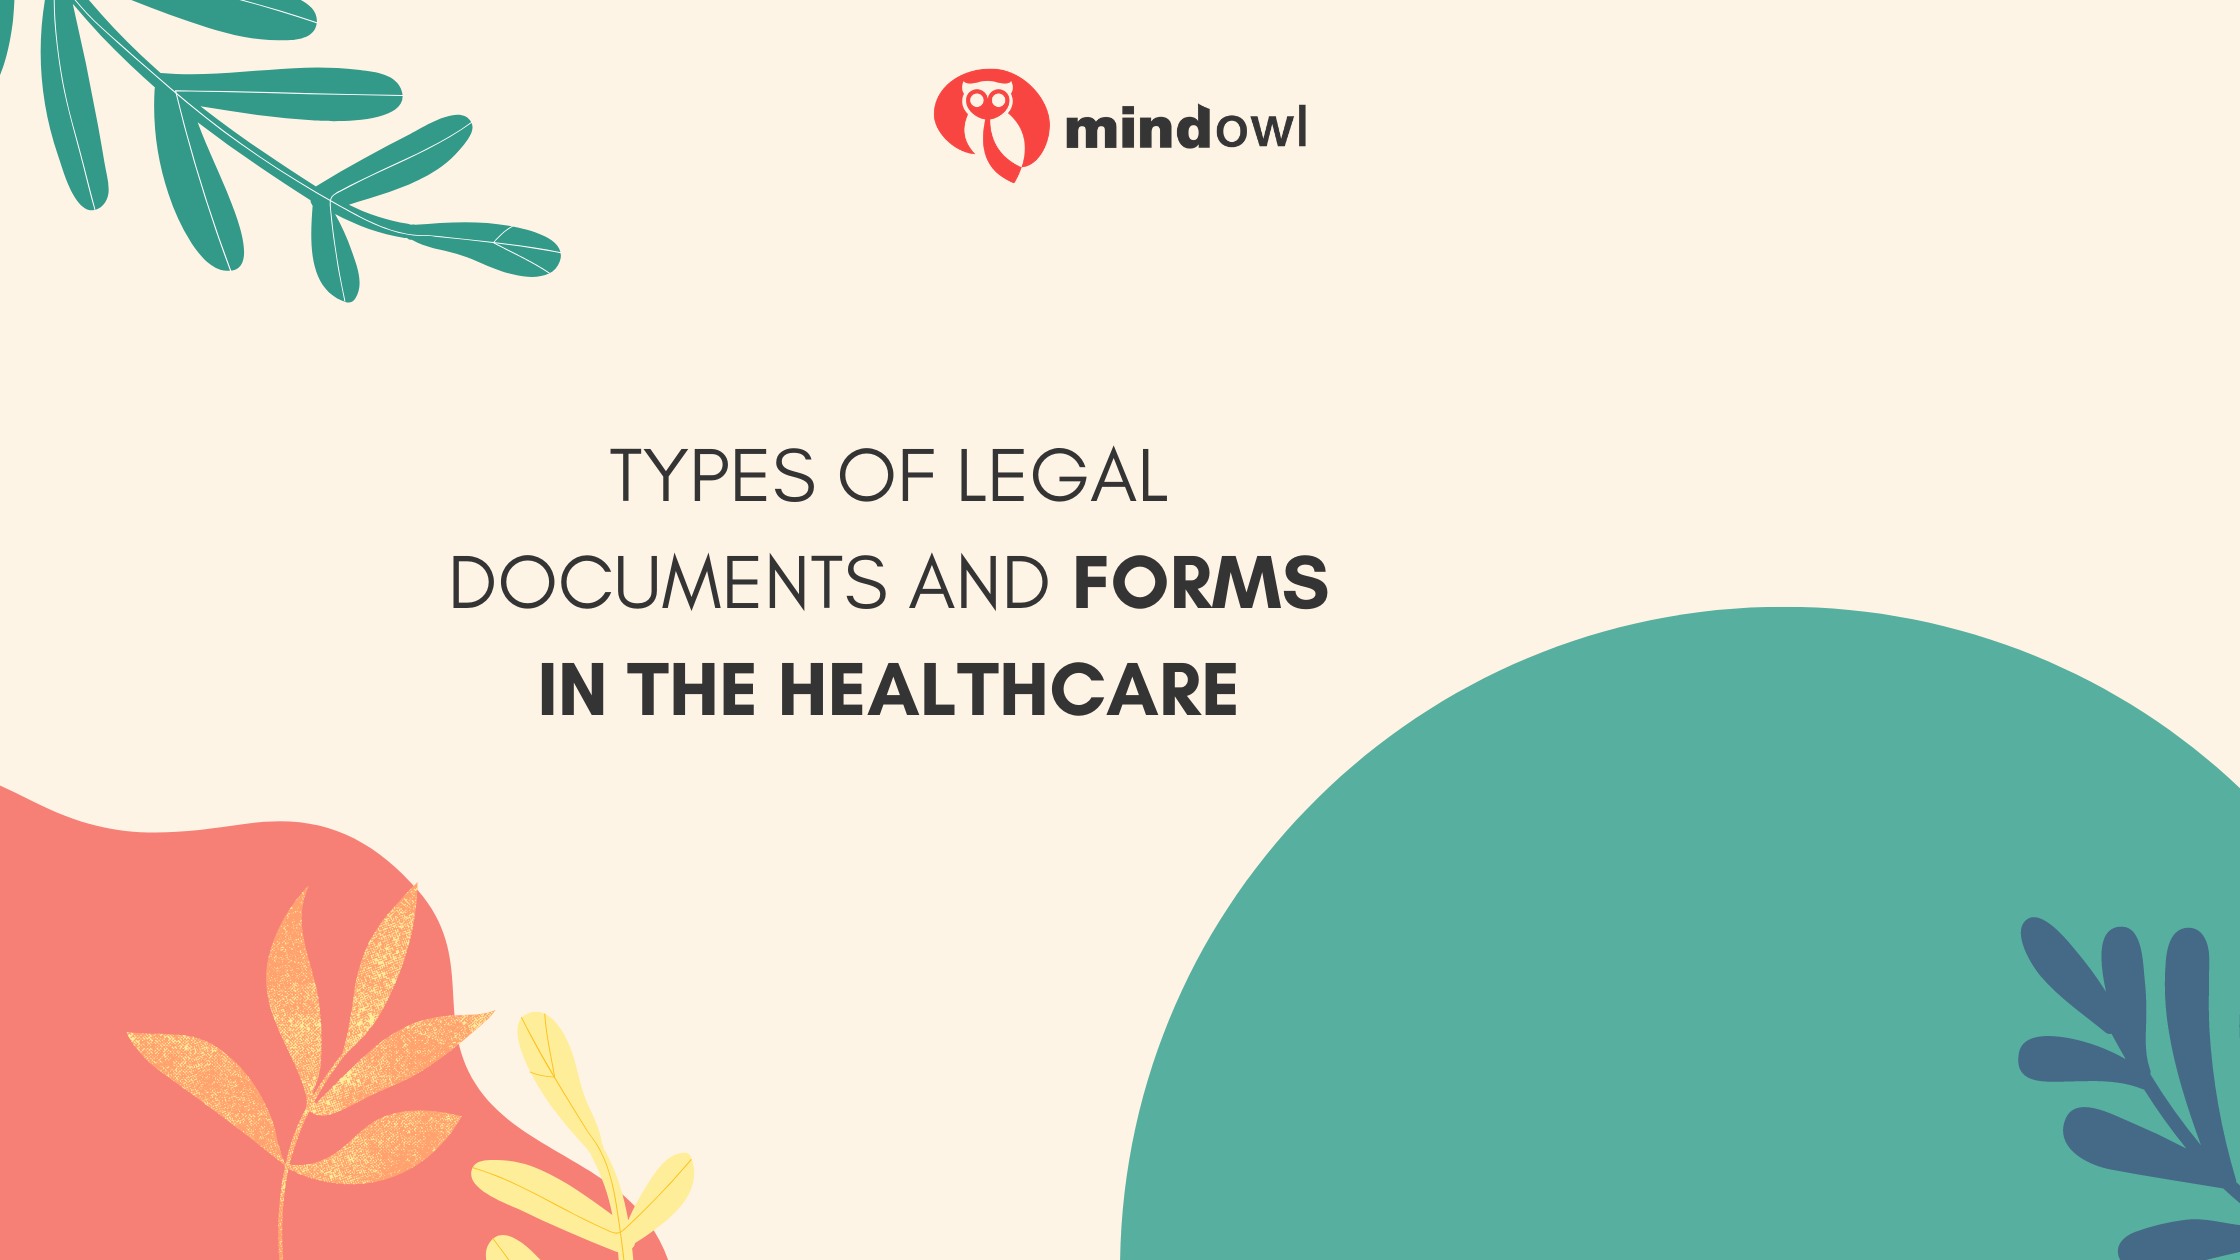 Types of Legal Documents and Forms in the Healthcare